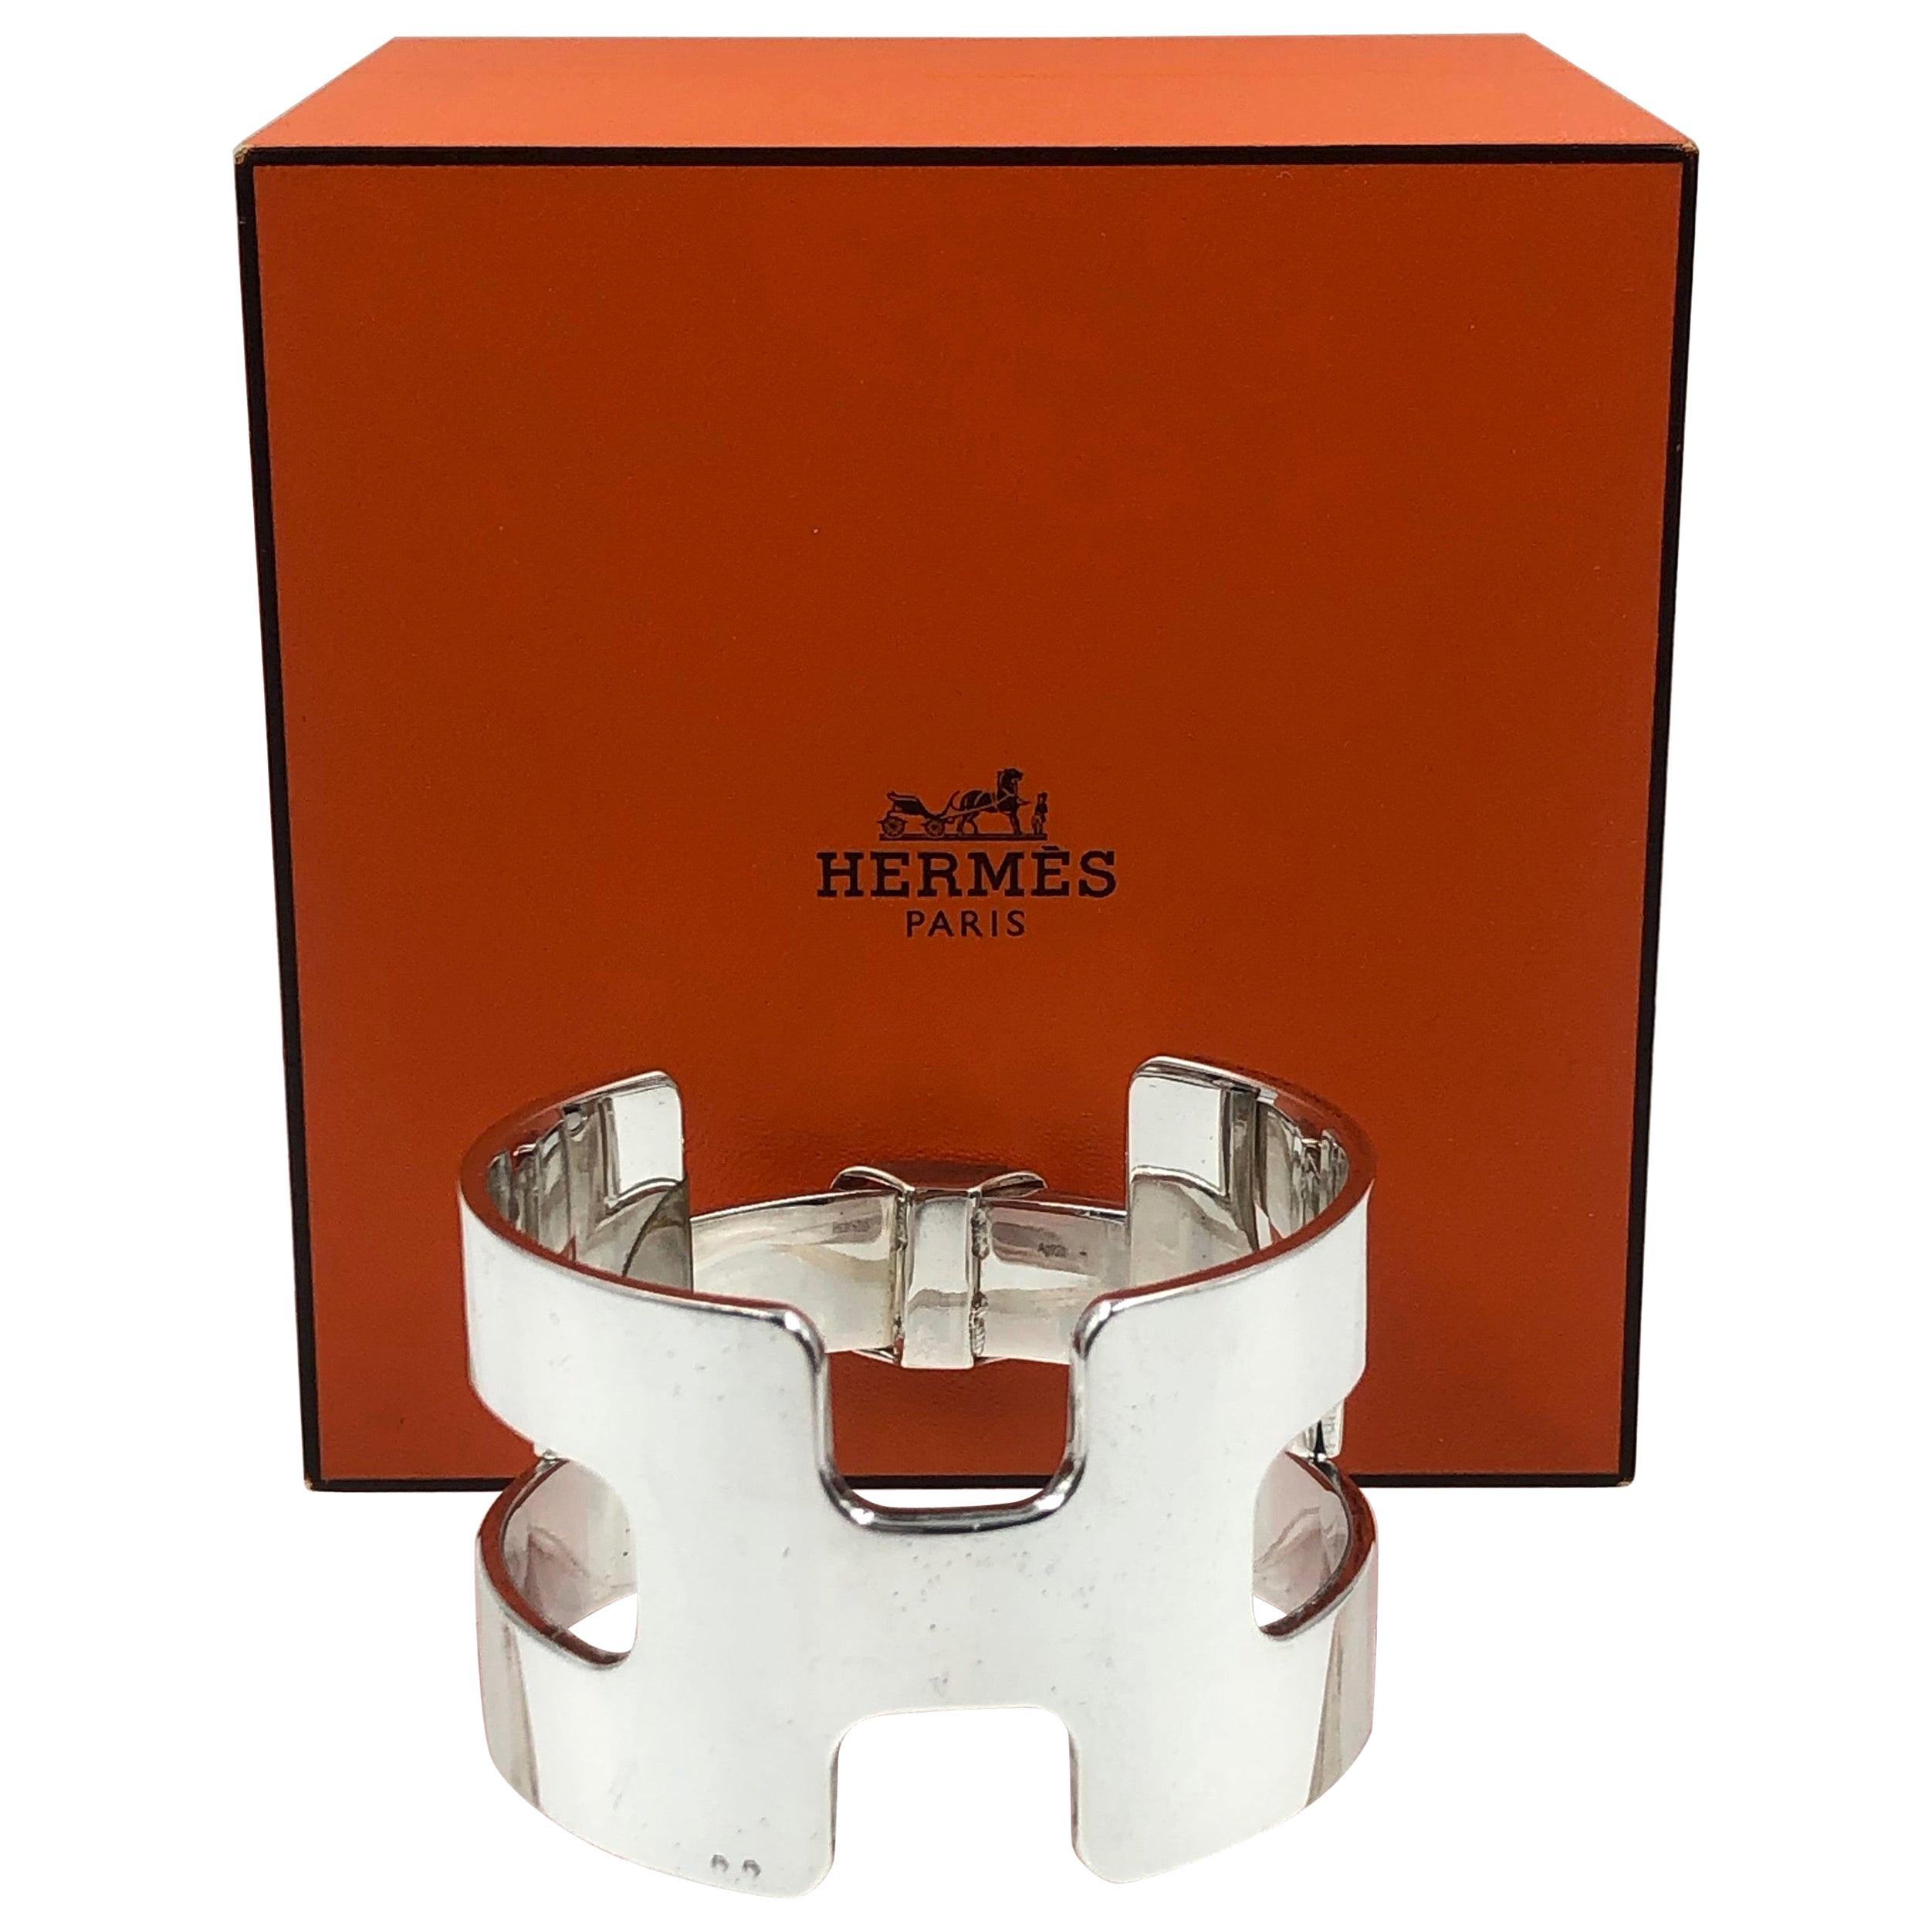 Hermés Classic H Sterling Silver Cuff Bracelet. 
Bracelet still has original plastic protection sticker on the clasp.
Bracelet was purchased at Hermés Beverly Hills.
Bracelet comes with original box and cover.
Bracelet was worn once and stored it's